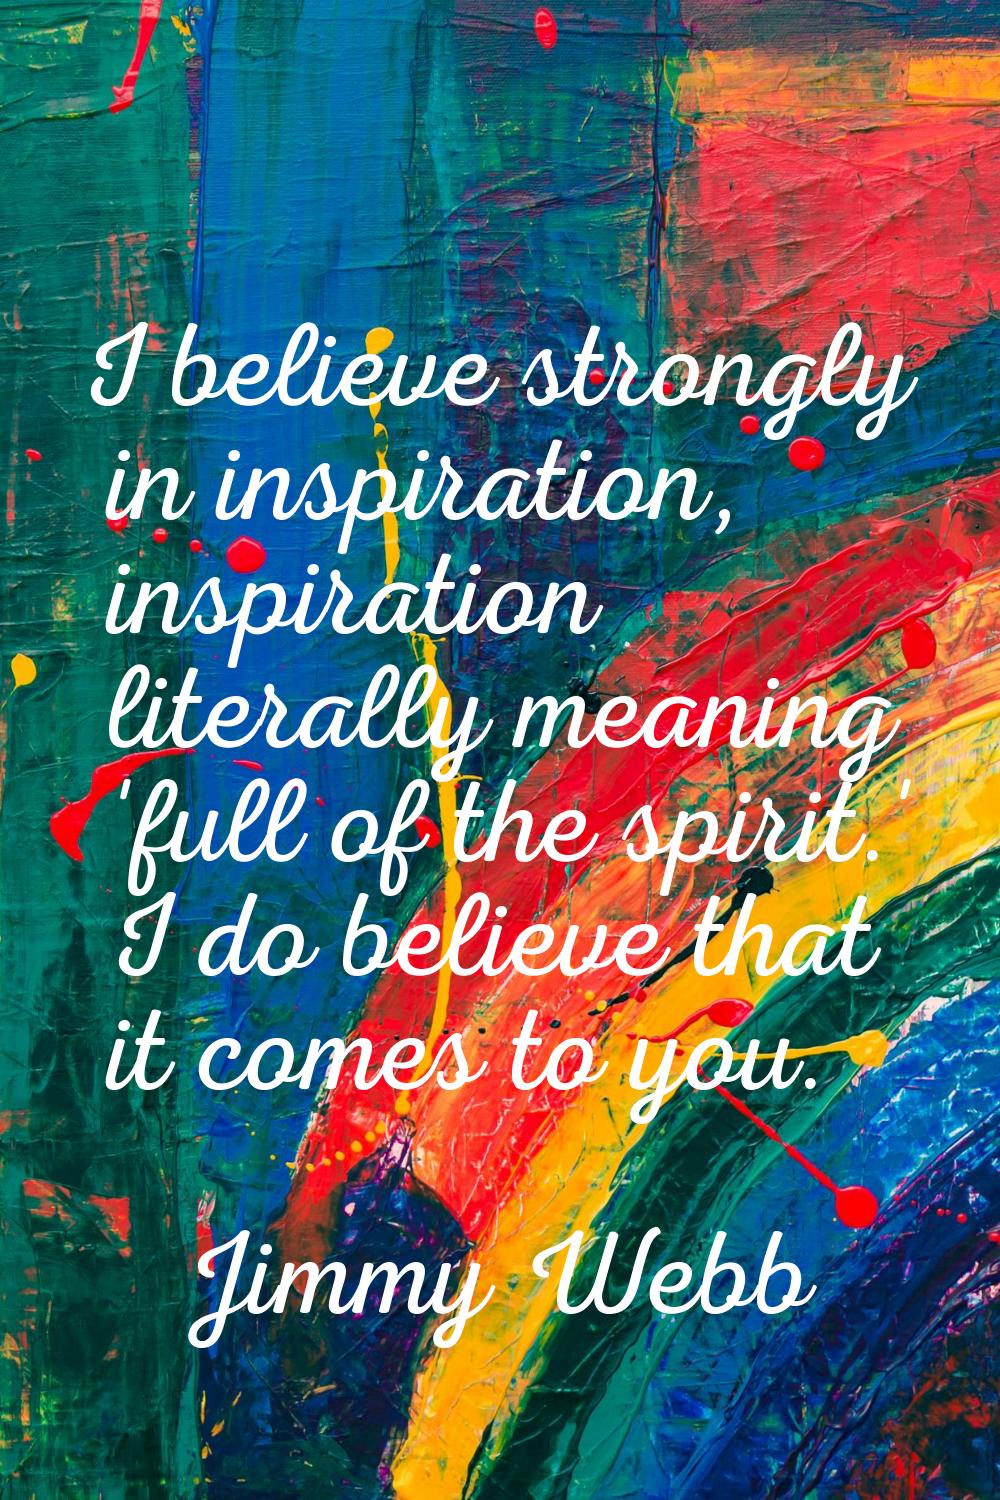 I believe strongly in inspiration, inspiration literally meaning 'full of the spirit.' I do believe